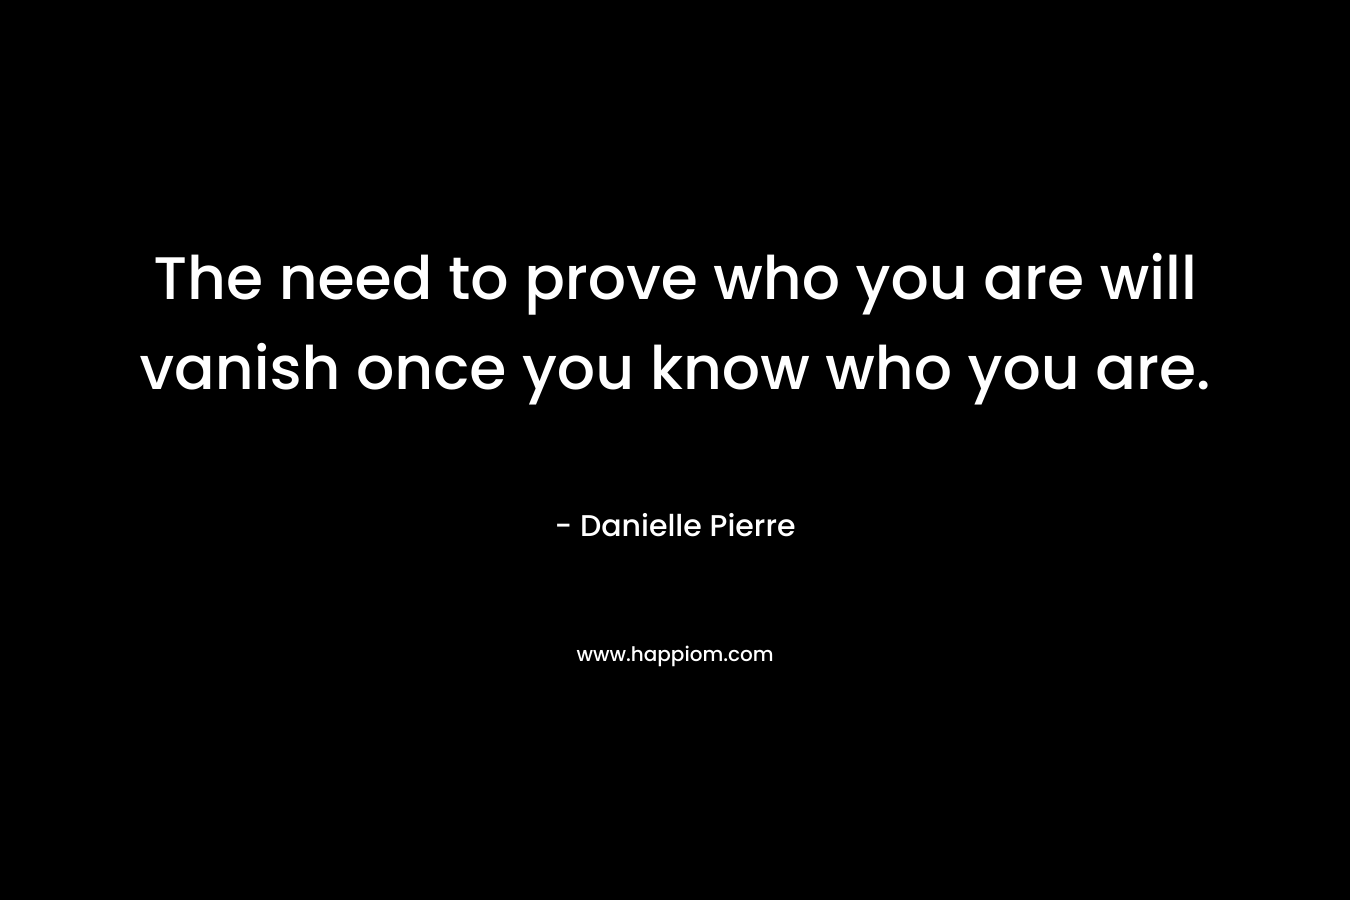 The need to prove who you are will vanish once you know who you are. – Danielle Pierre